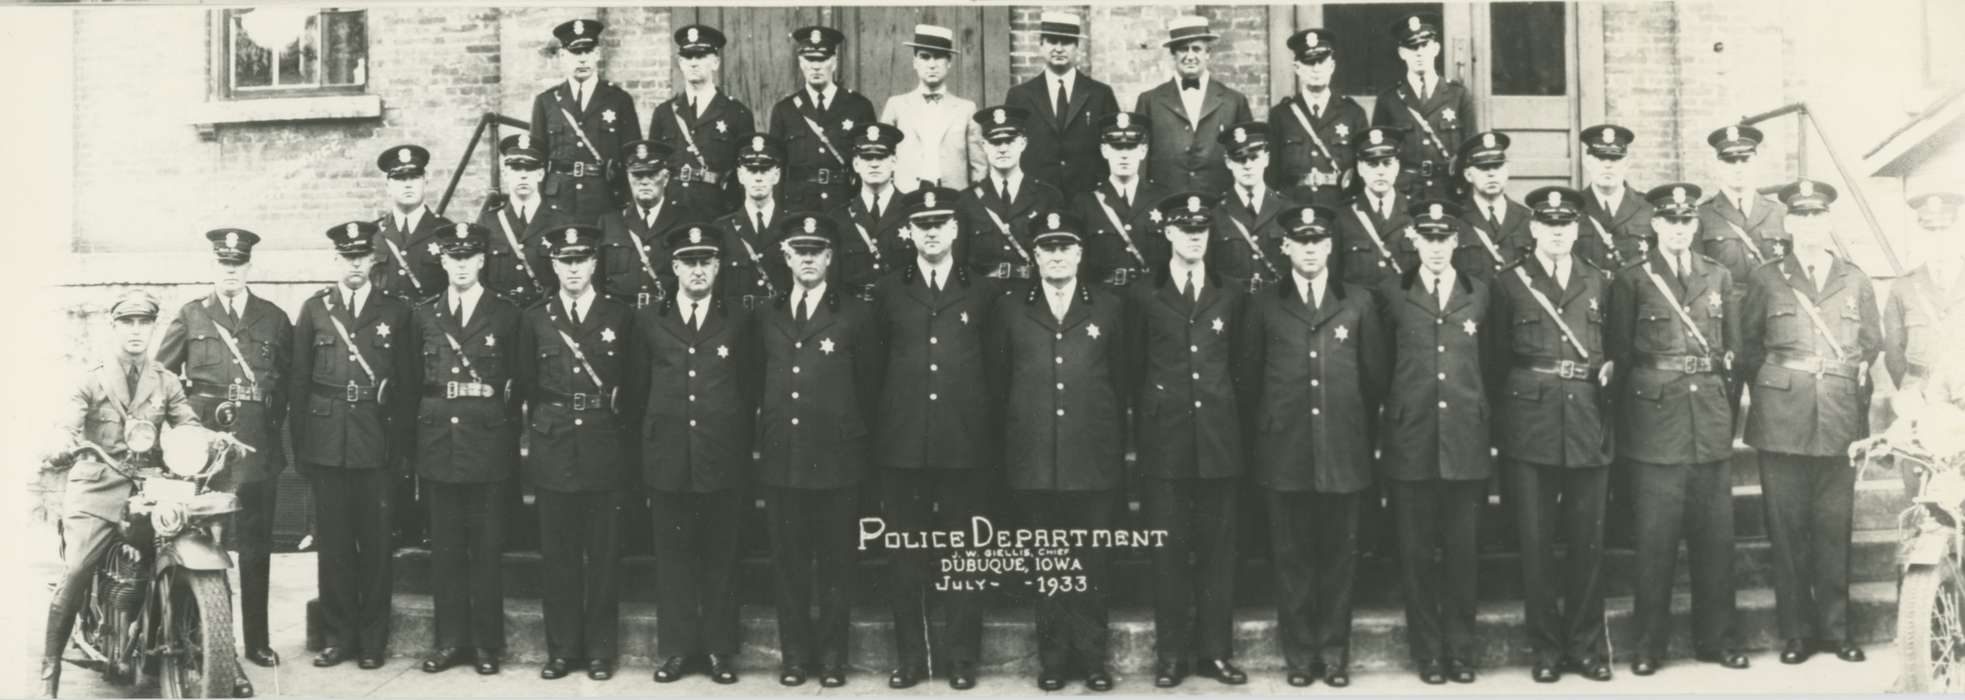 police, Iowa, Portraits - Group, motorcycle, Iowa History, history of Iowa, Dubuque, IA, uniform, Cities and Towns, Whitfield, Carla & Richard, Labor and Occupations